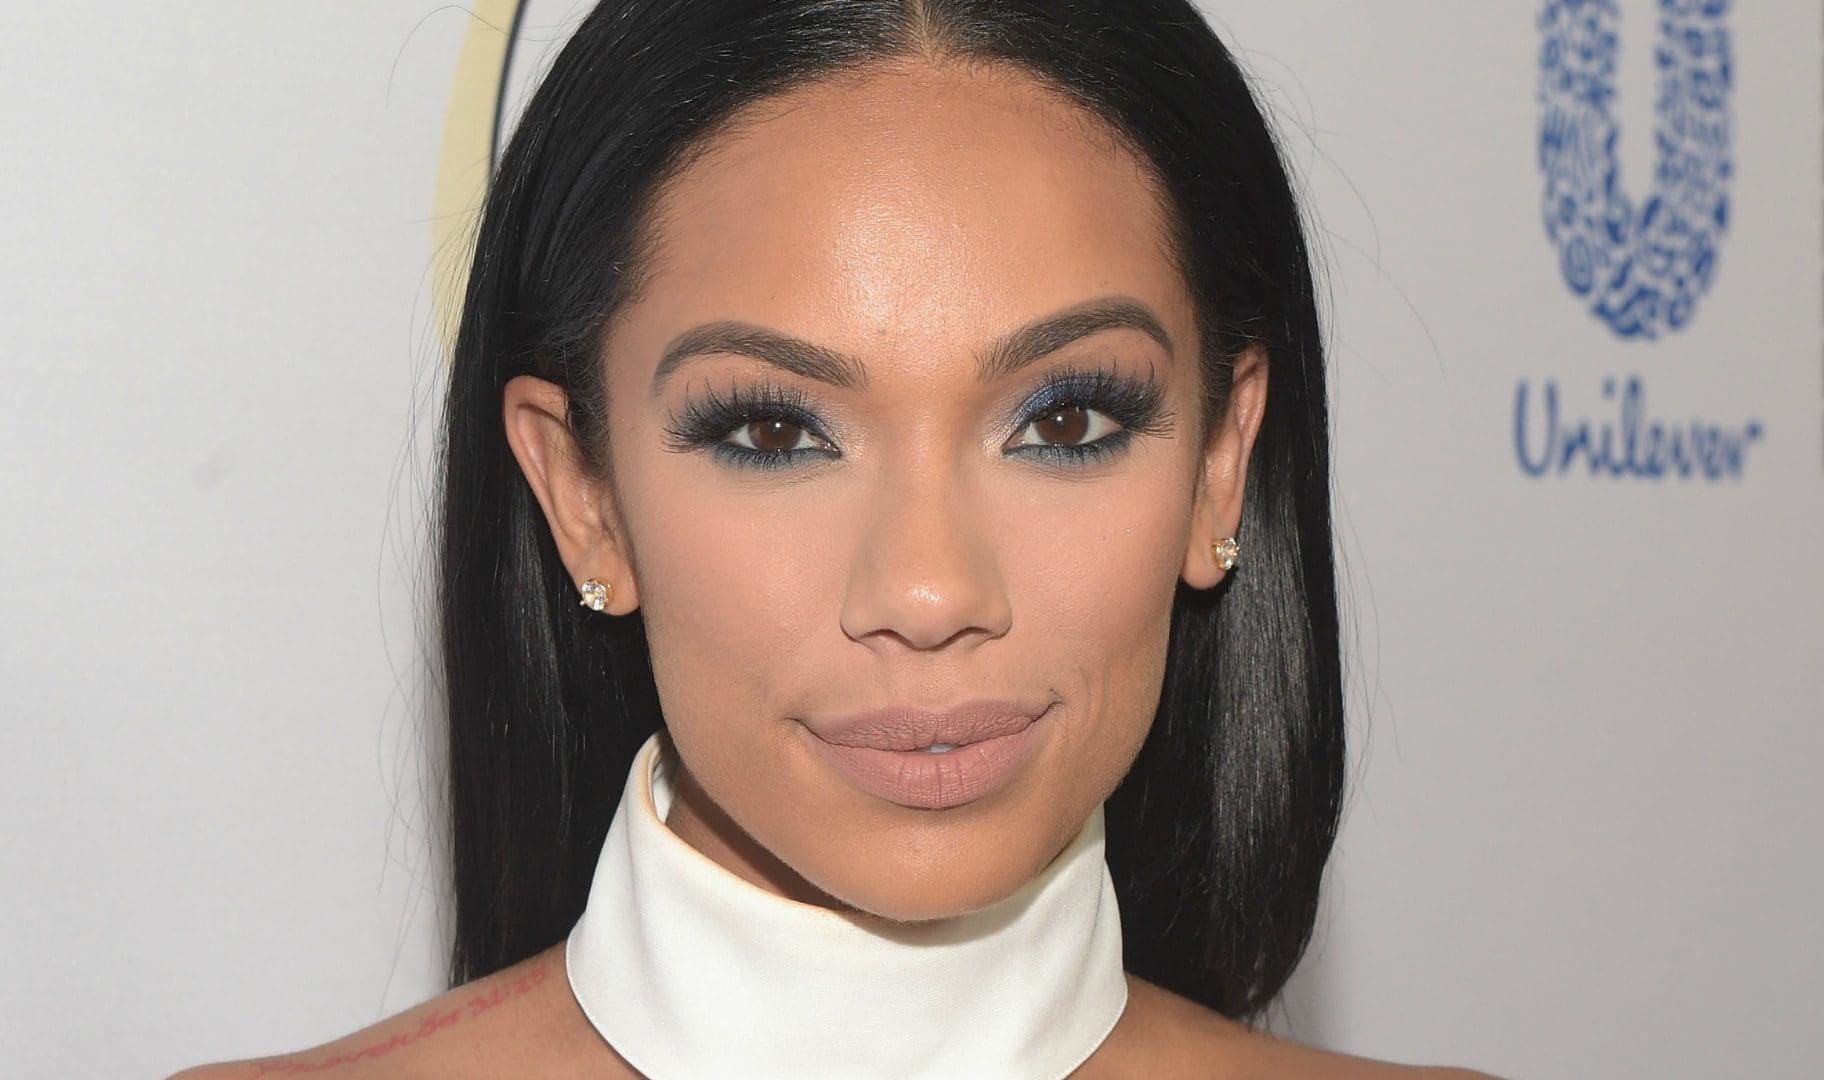 Erica Mena Teases A Potential New Pregnancy With This Throwback Photo